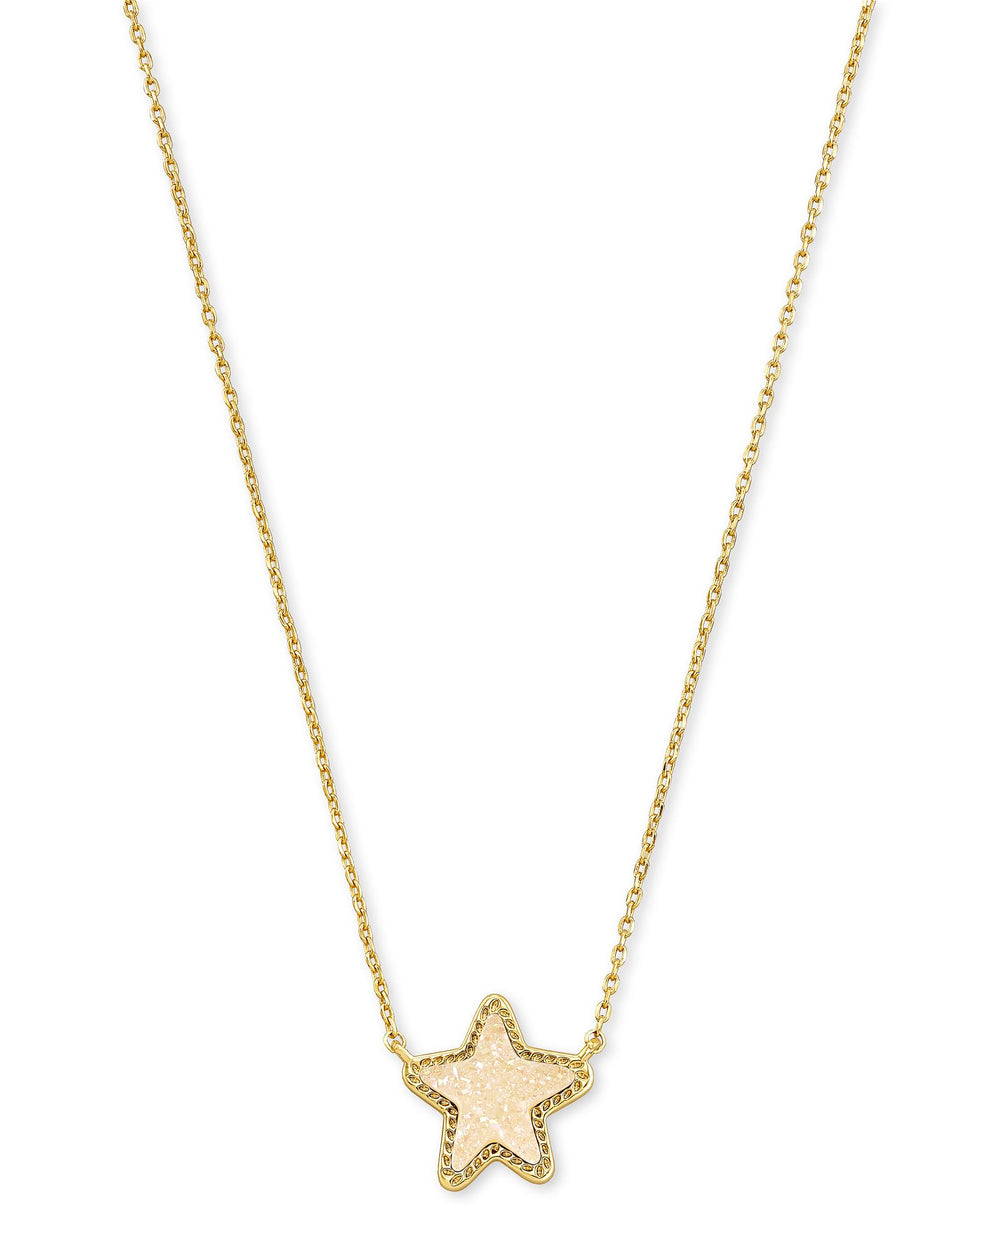 Jae Star Gold Pendant Necklace in Iridescent Drusy